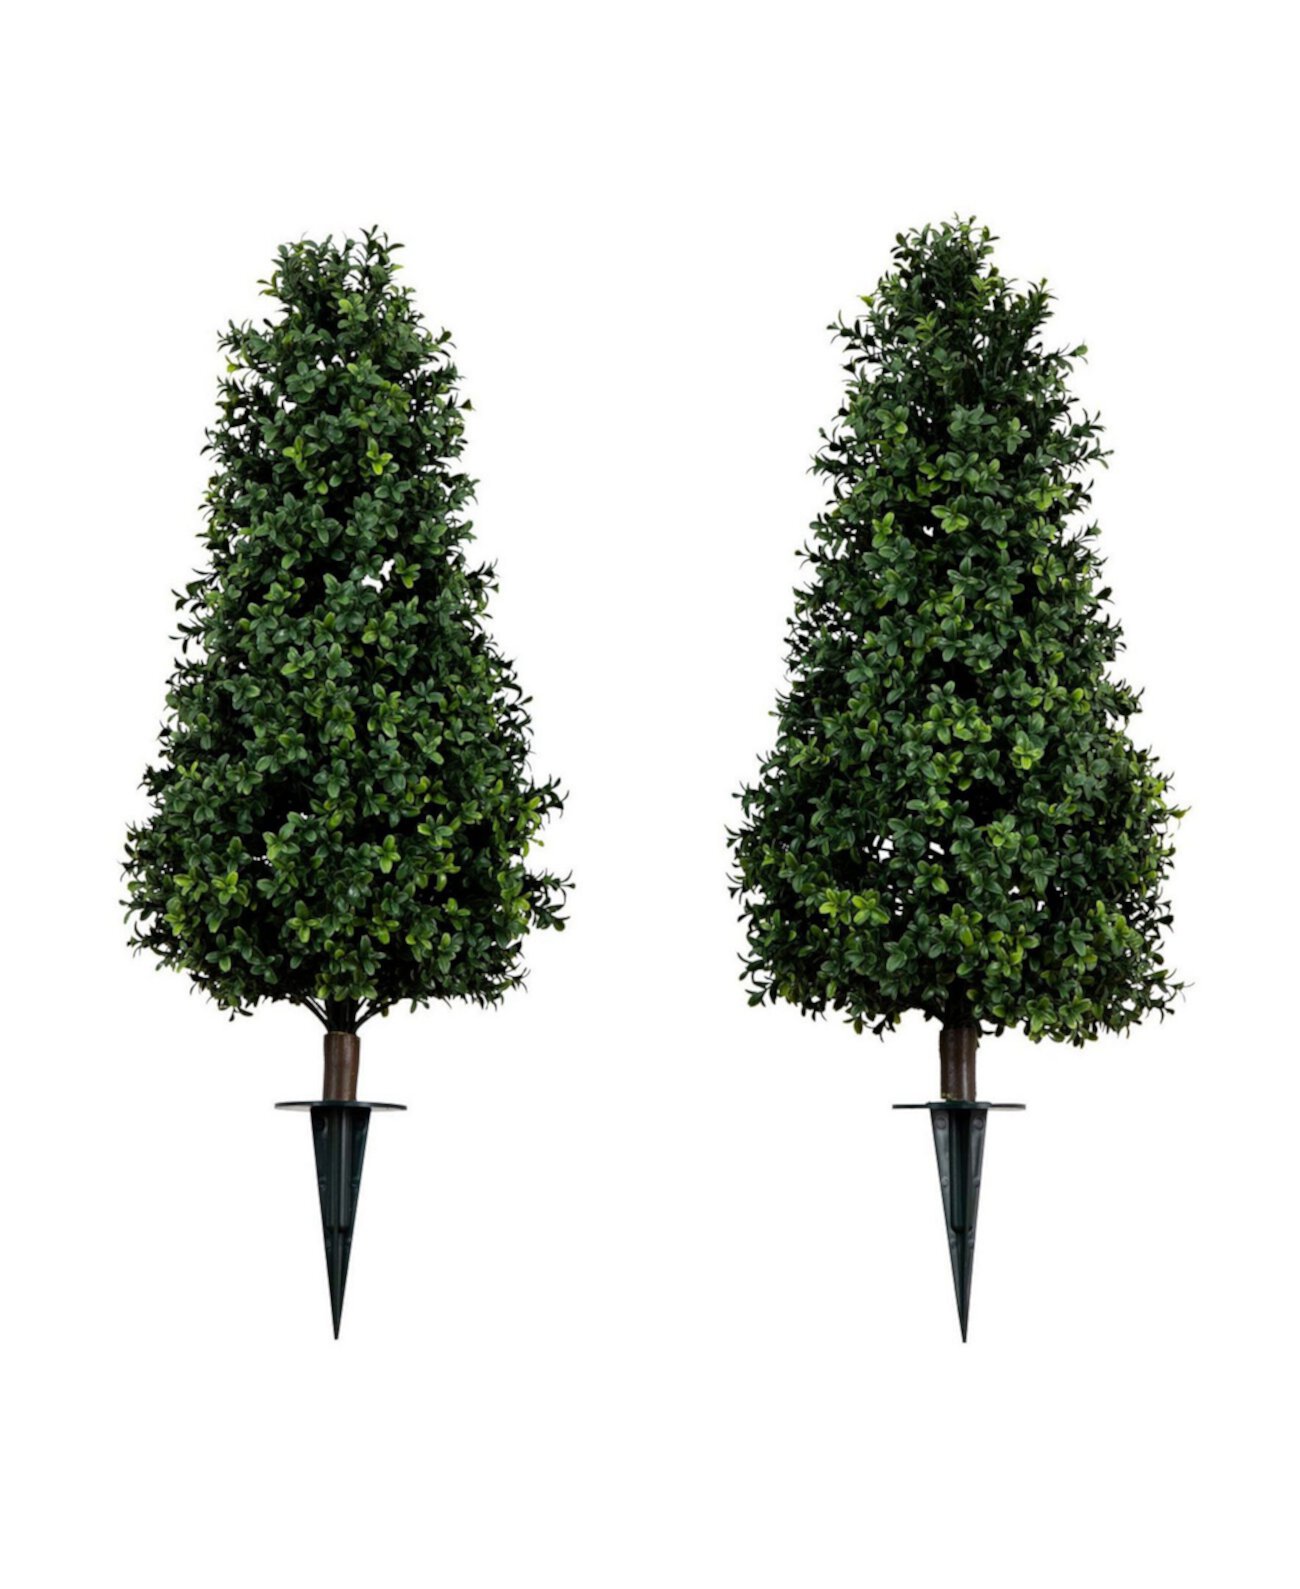 3ft. UV Resistant Artificial Boxwood Plant with Integrated Ground Stake Indoor/Outdoor - Set of 2 NEARLY NATURAL